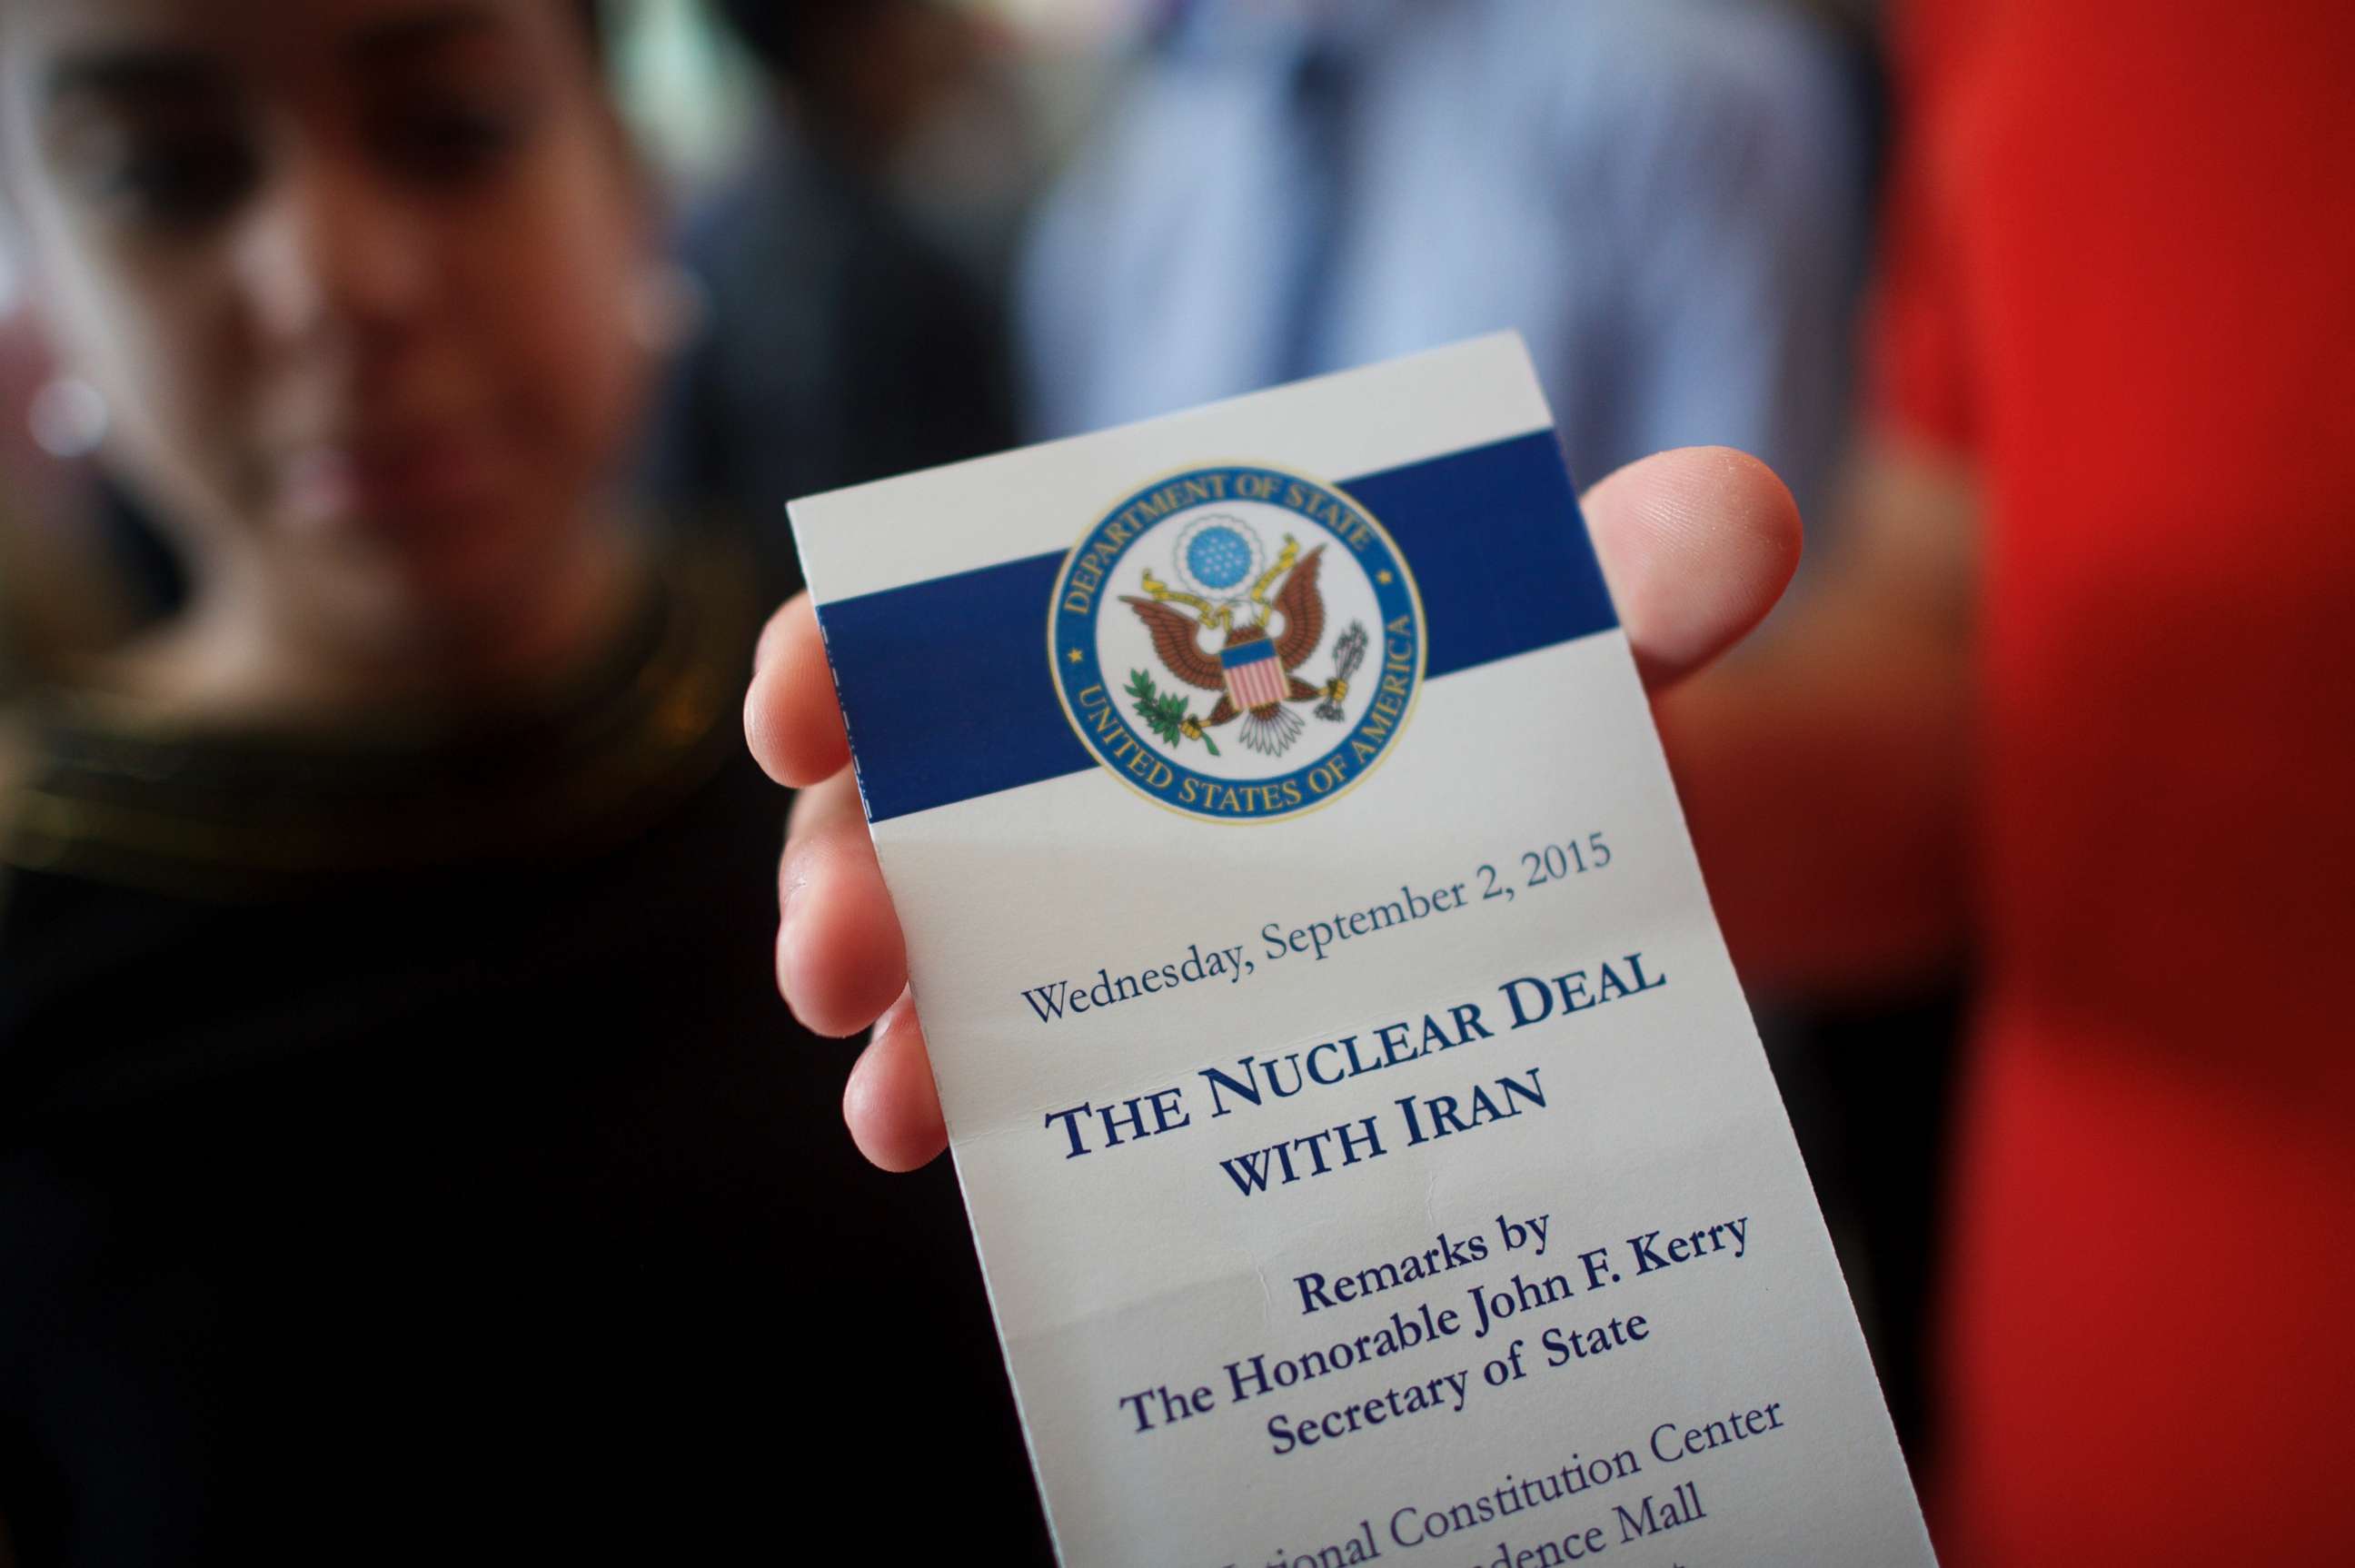 PHOTO: An attendee holds a ticket from the speech U.S. Secretary of State John Kerry delivered on the nuclear agreement with Iran at the National Constitution Center, Sept. 2, 2015, in Philadelphia.